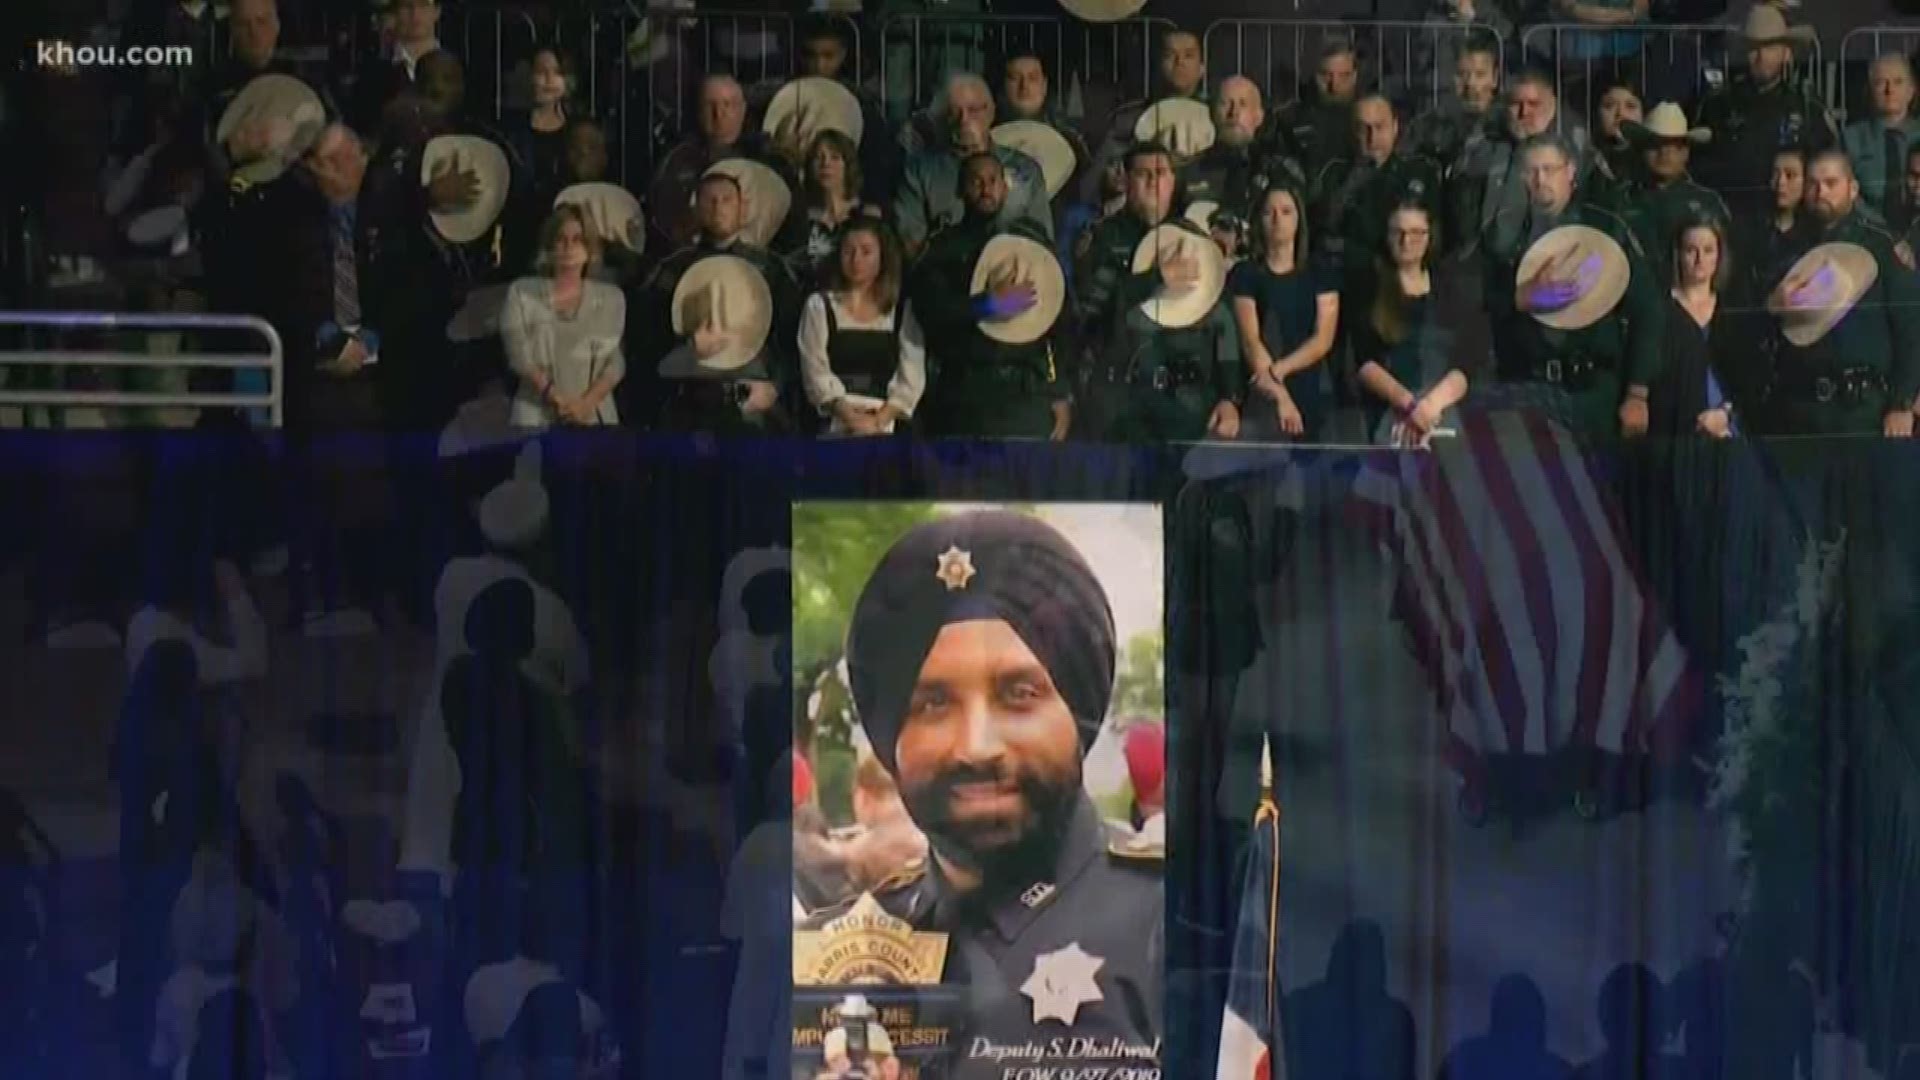 Thousands gathered to celebrate the life of fallen Harris County deputy Sandeep Dahliwal.